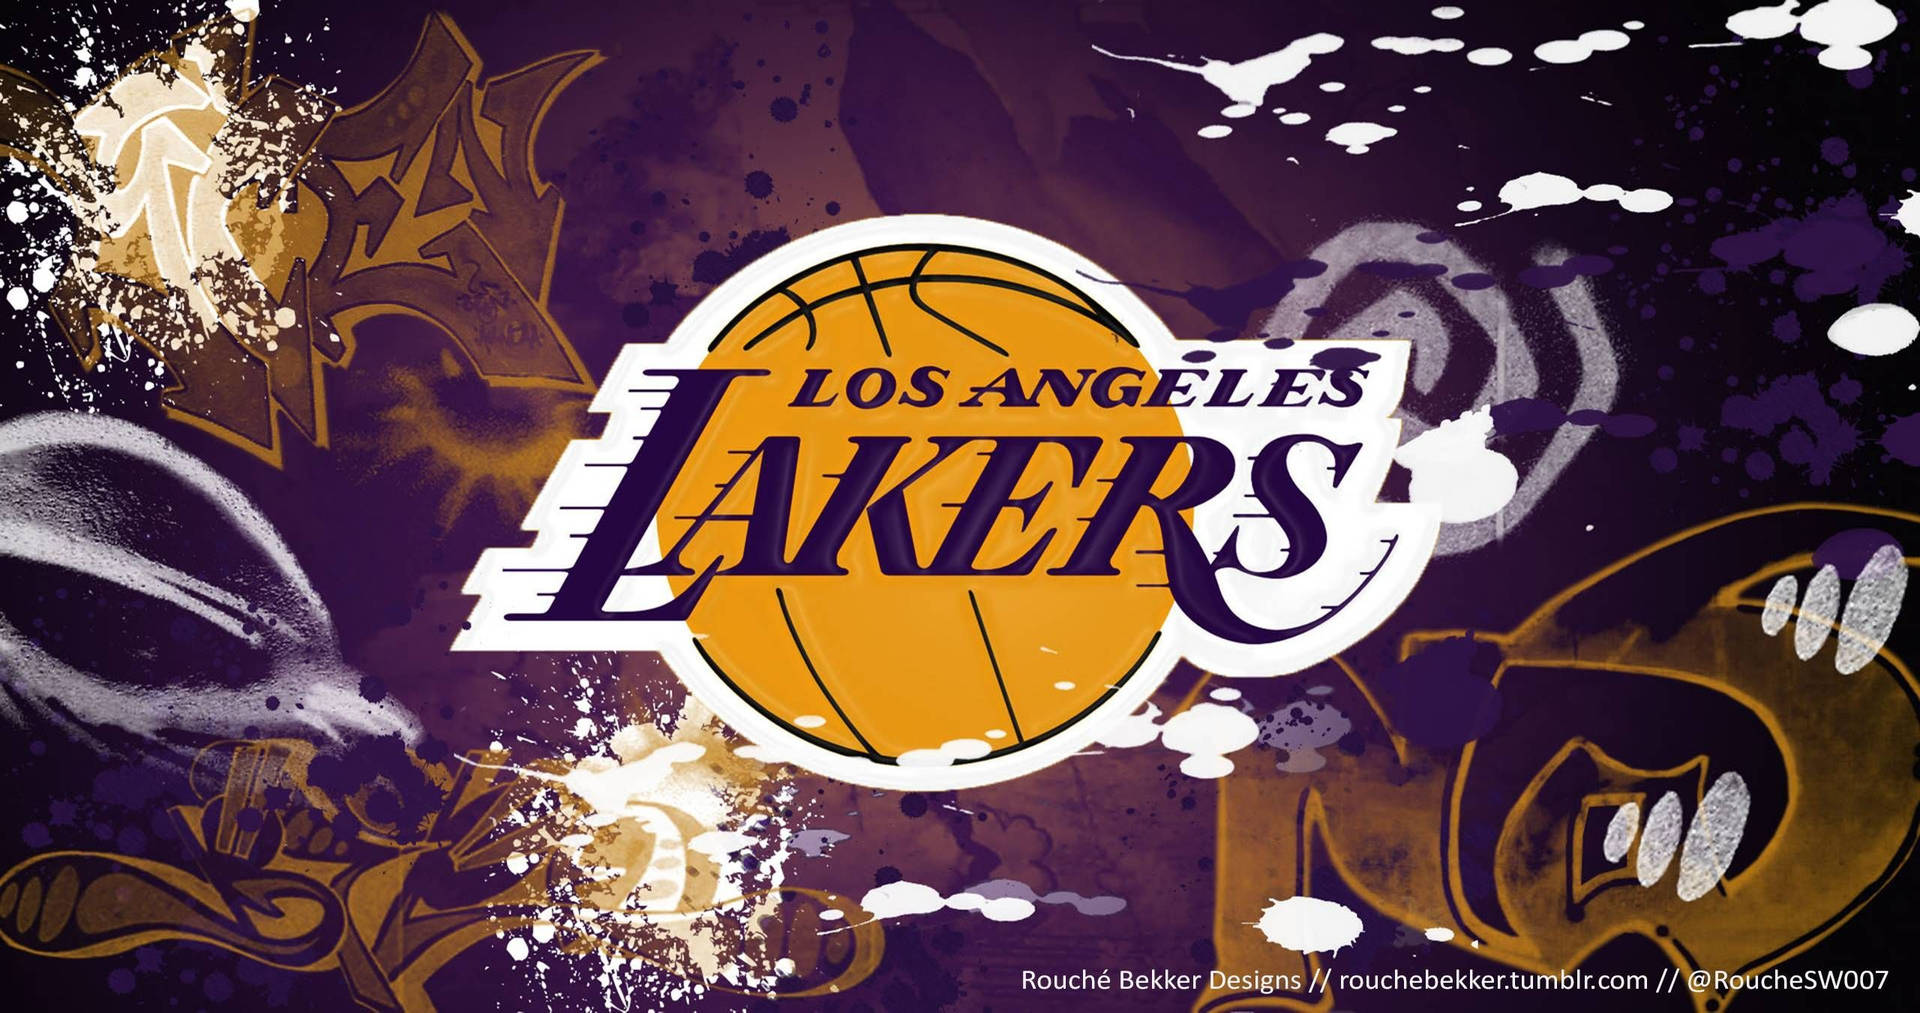 Lakers Wallpapers